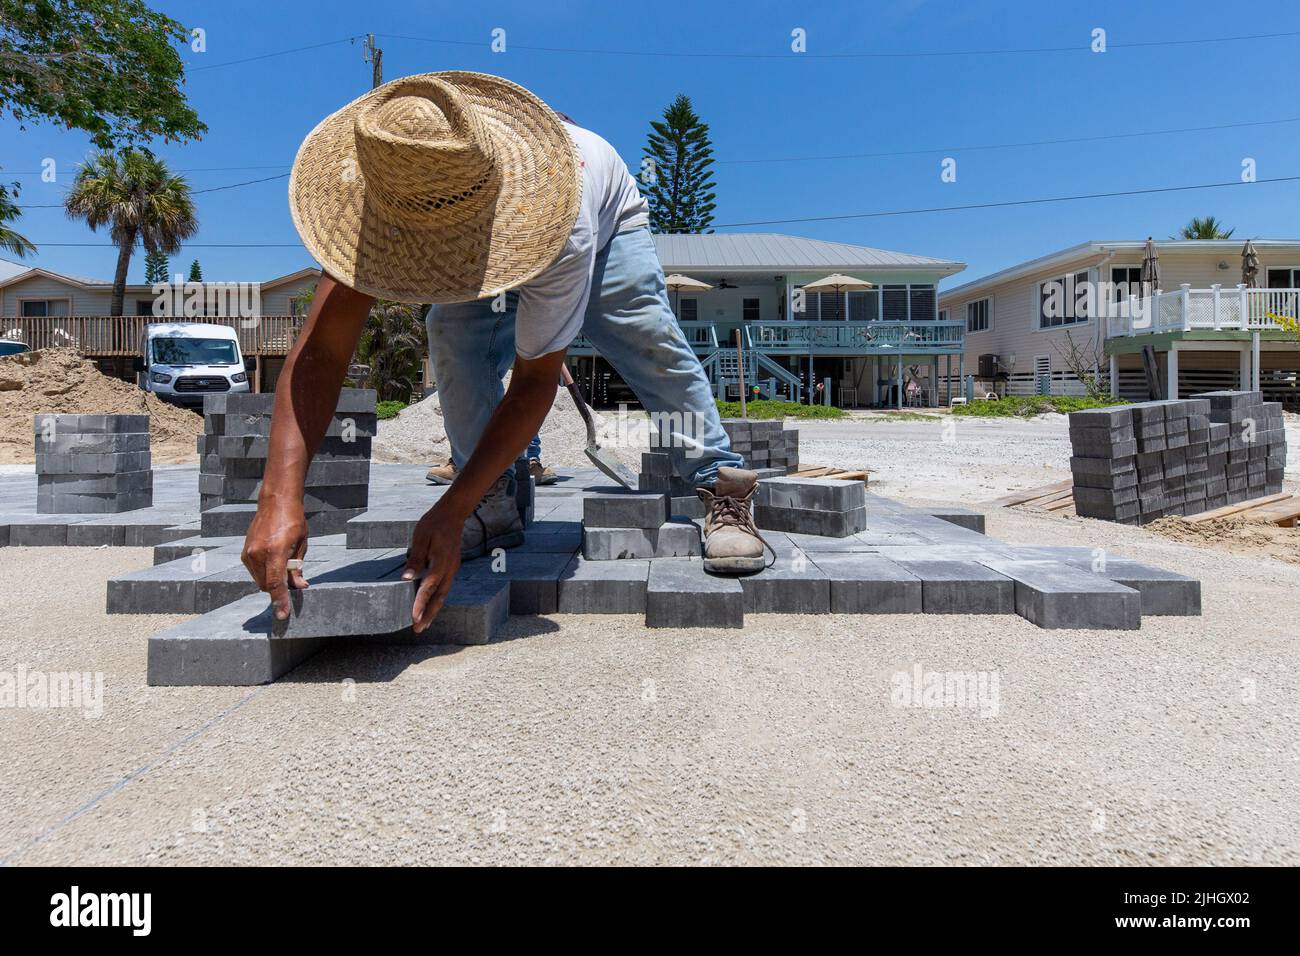 professional paver is laying down paving bricks on a prepared sandy surface to create a walk way and driveway to a new house under construction Stock Photo